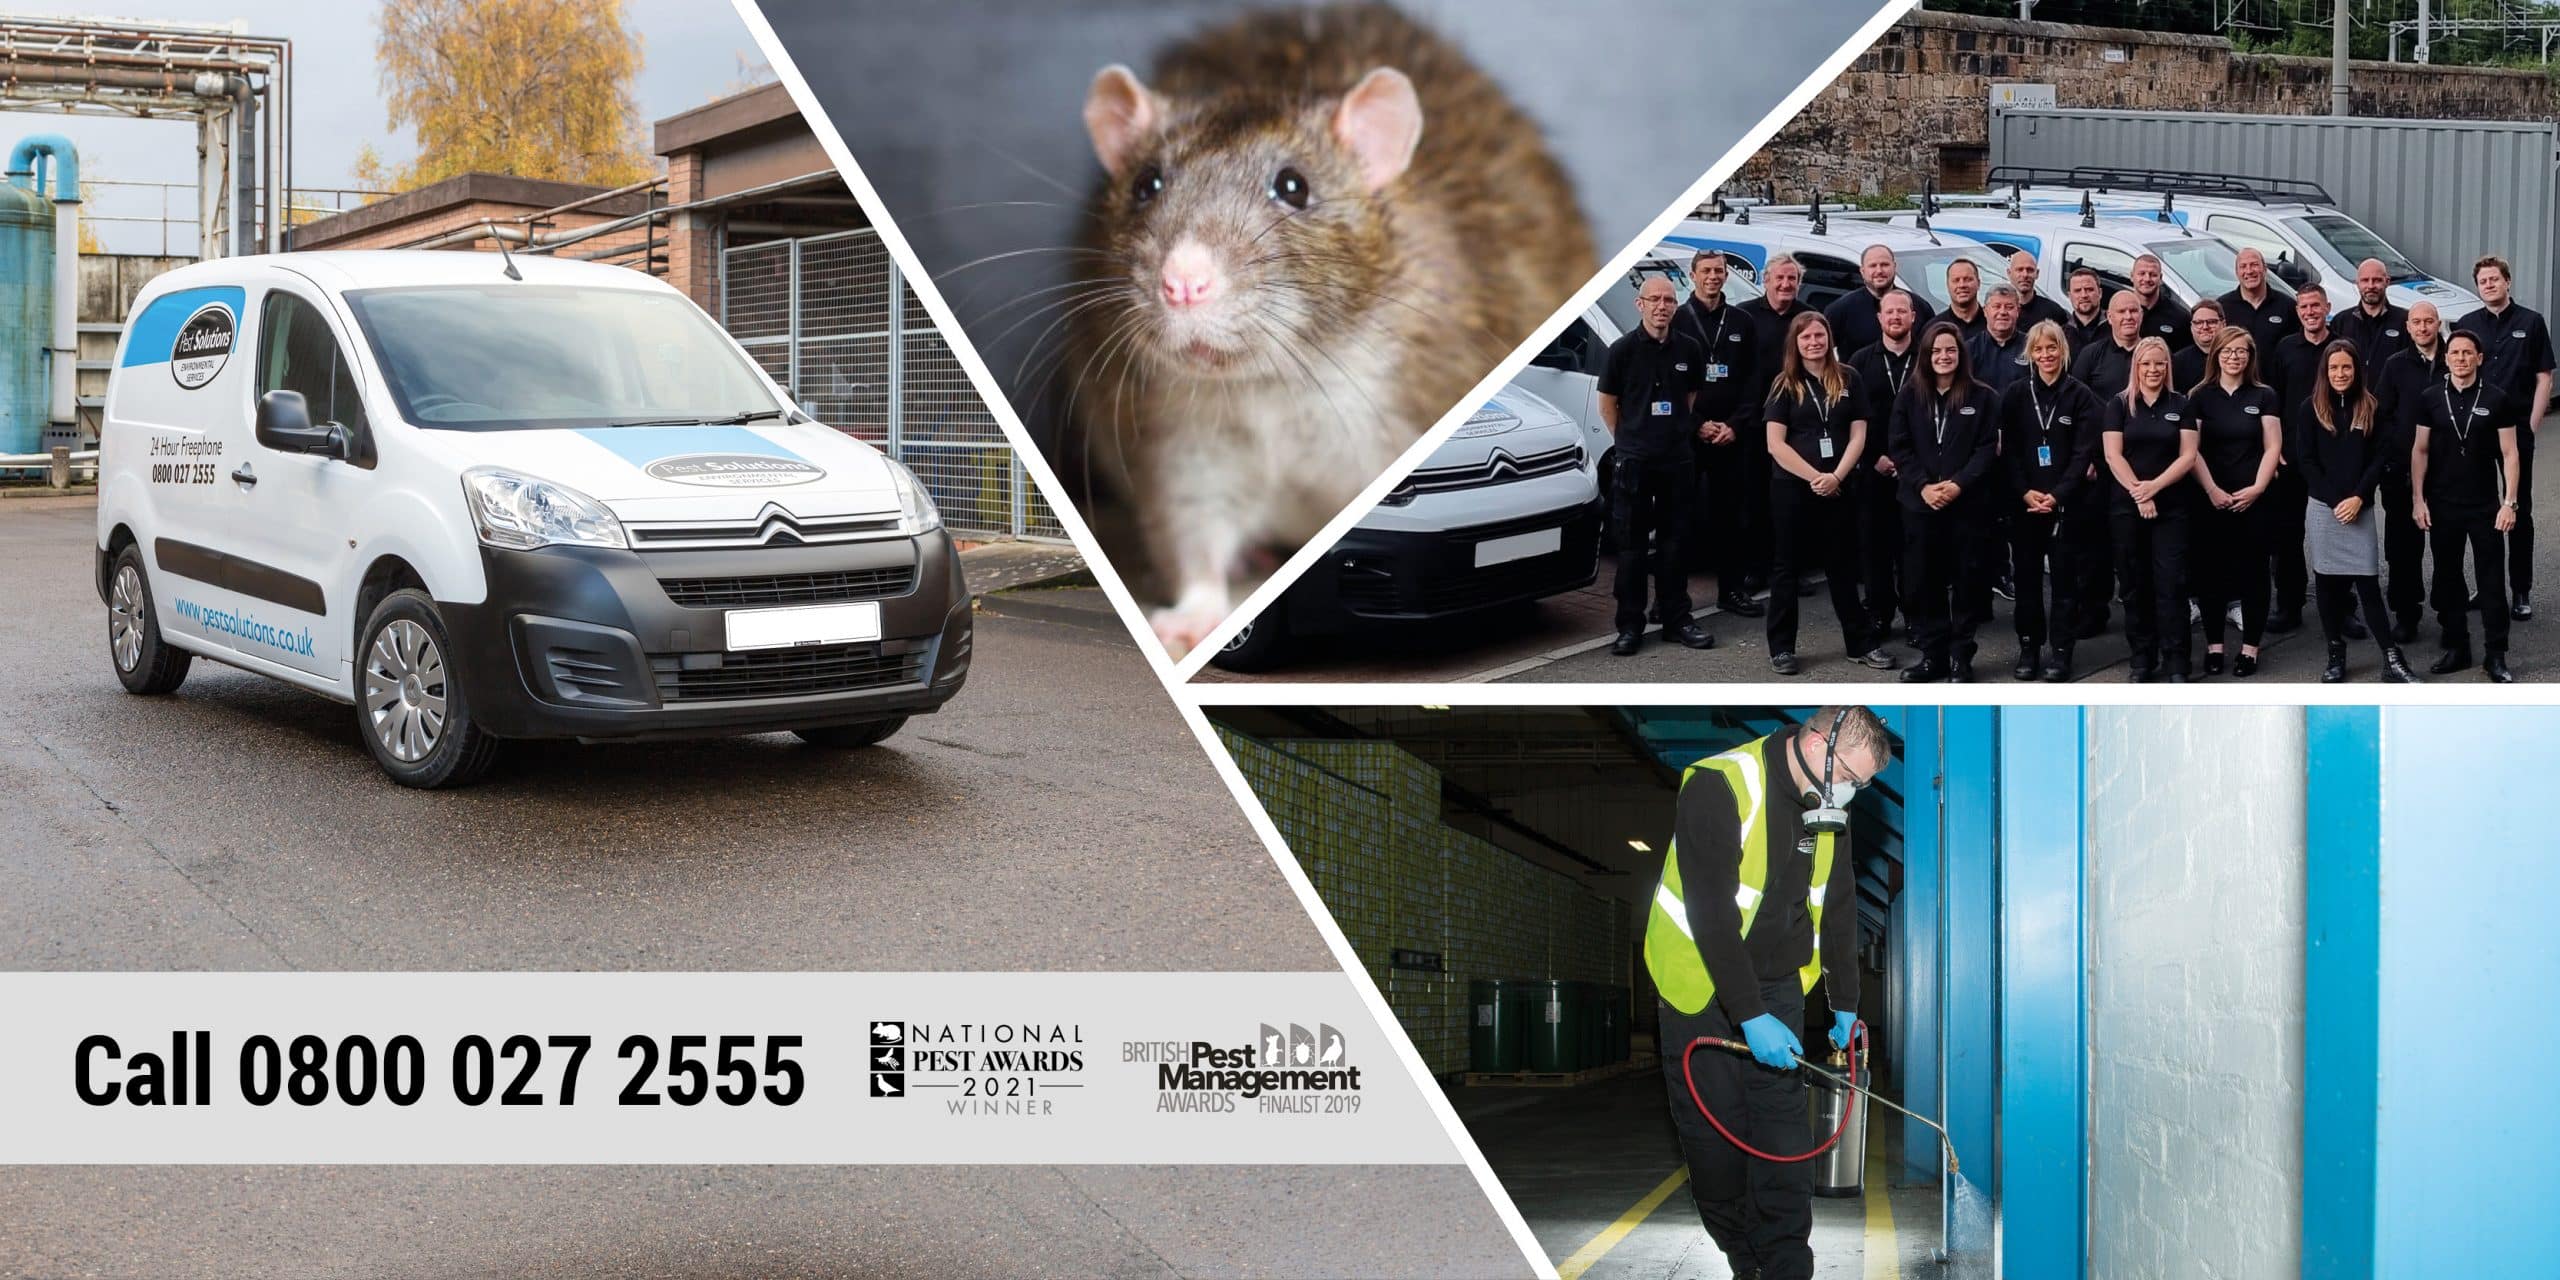 Professional Pest Control Services From Pest Solutions - Award Winning Pest Services